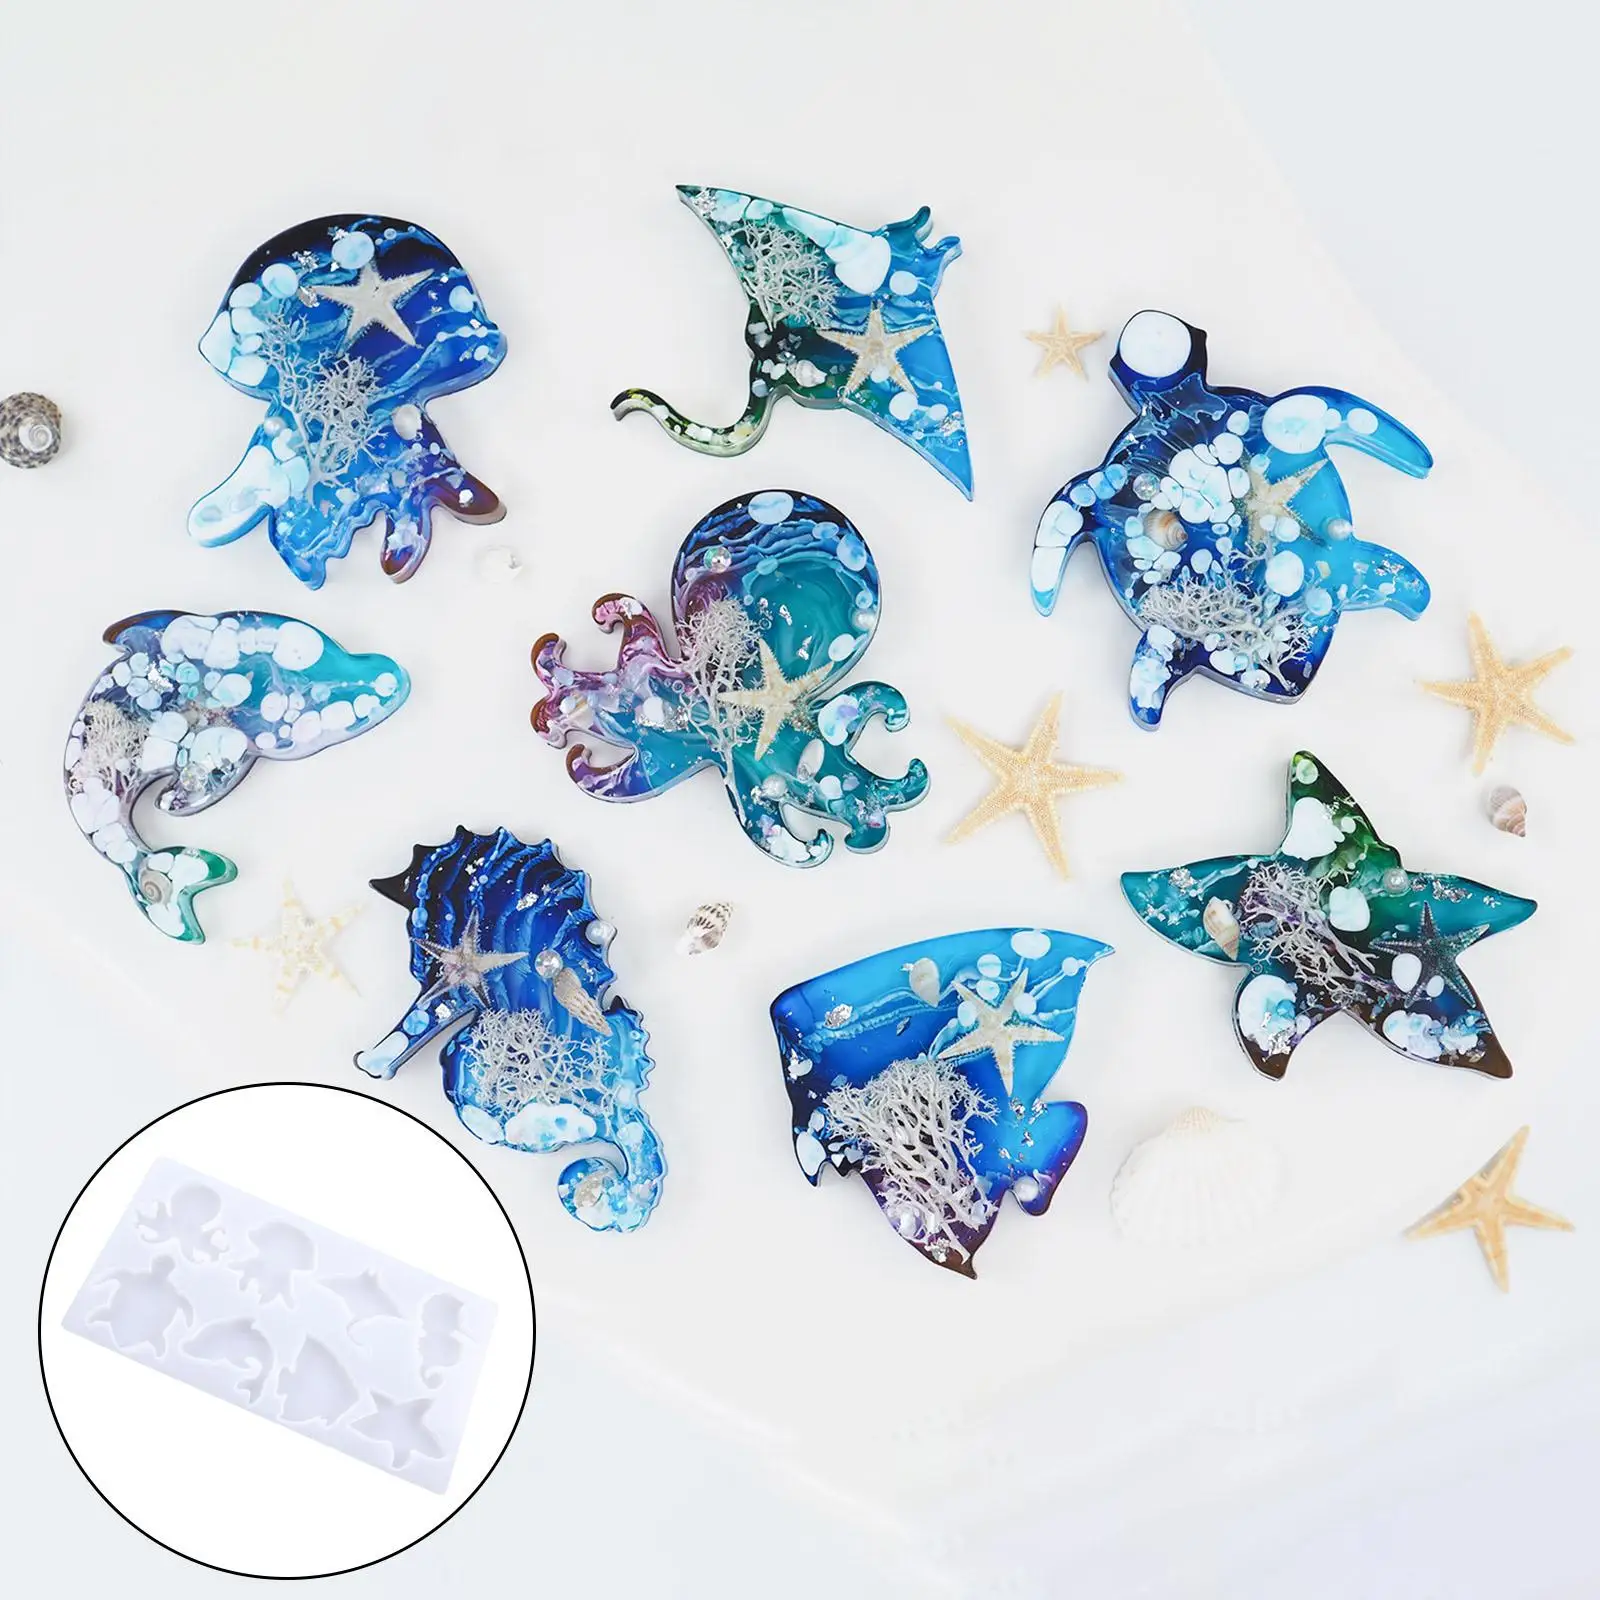 Resin Animal Keychain Silicone Die, Crafting Epoxy Handmade for Jewelry Crafts Pendant DIY , Dolphin, Jellyfish